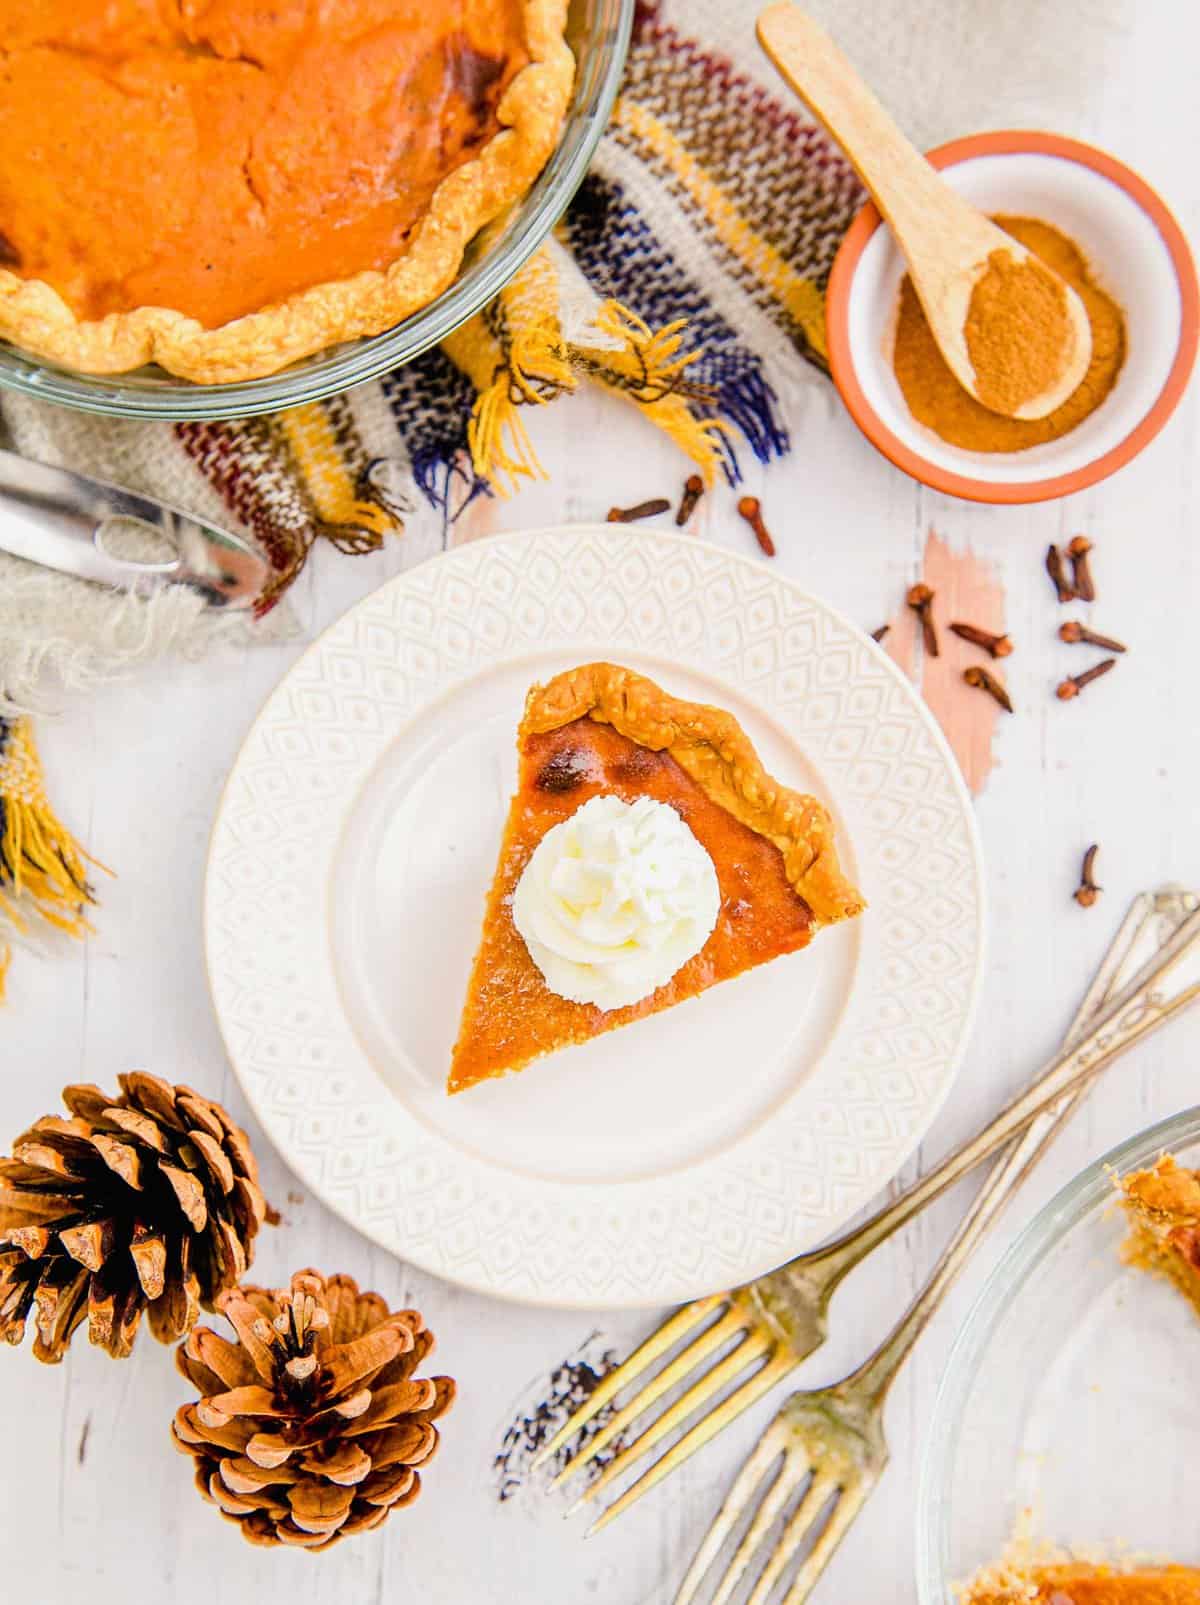 Pinecones and forks are placed next to a white plate that contains a single slice of pumpkin pie. 